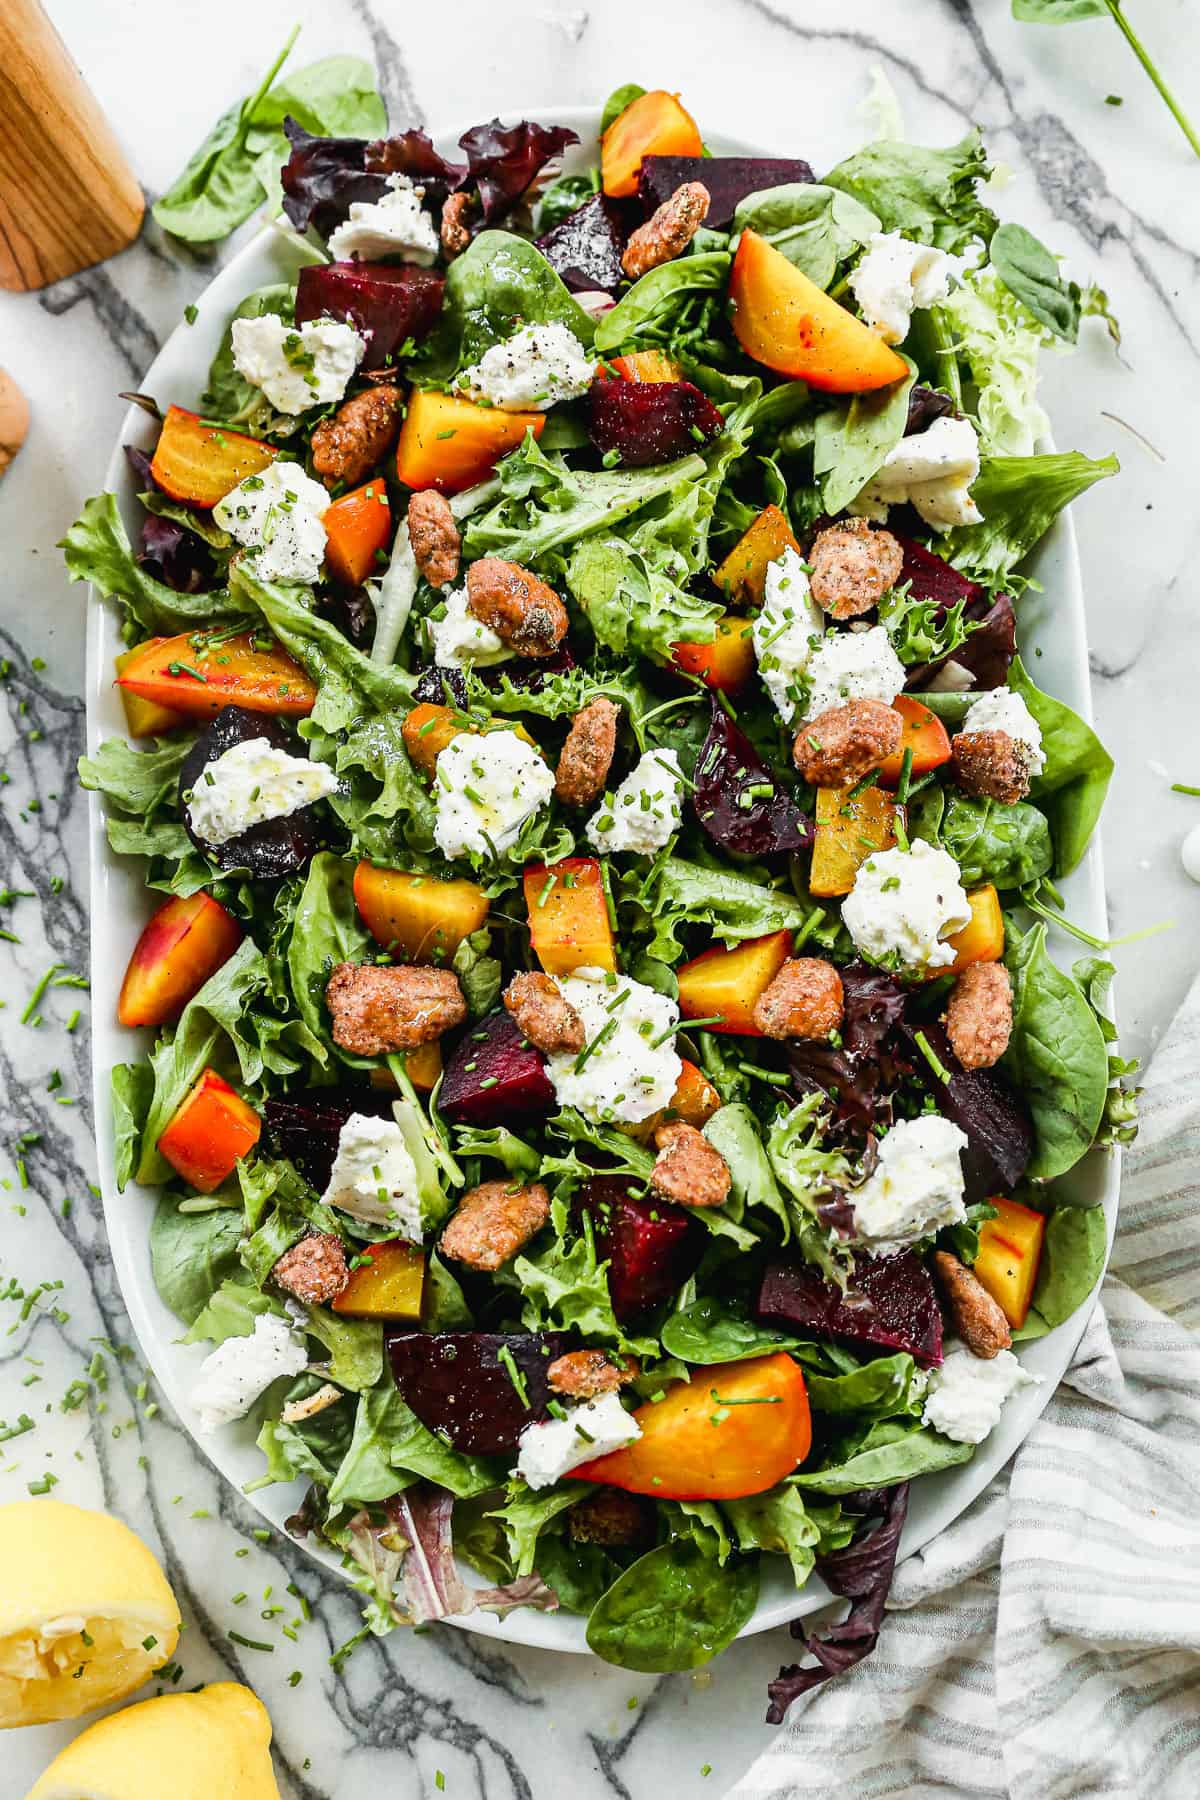 A roasted Beet Salad on a bed of mixed greens with beets, walnuts, and whipped goat cheese.